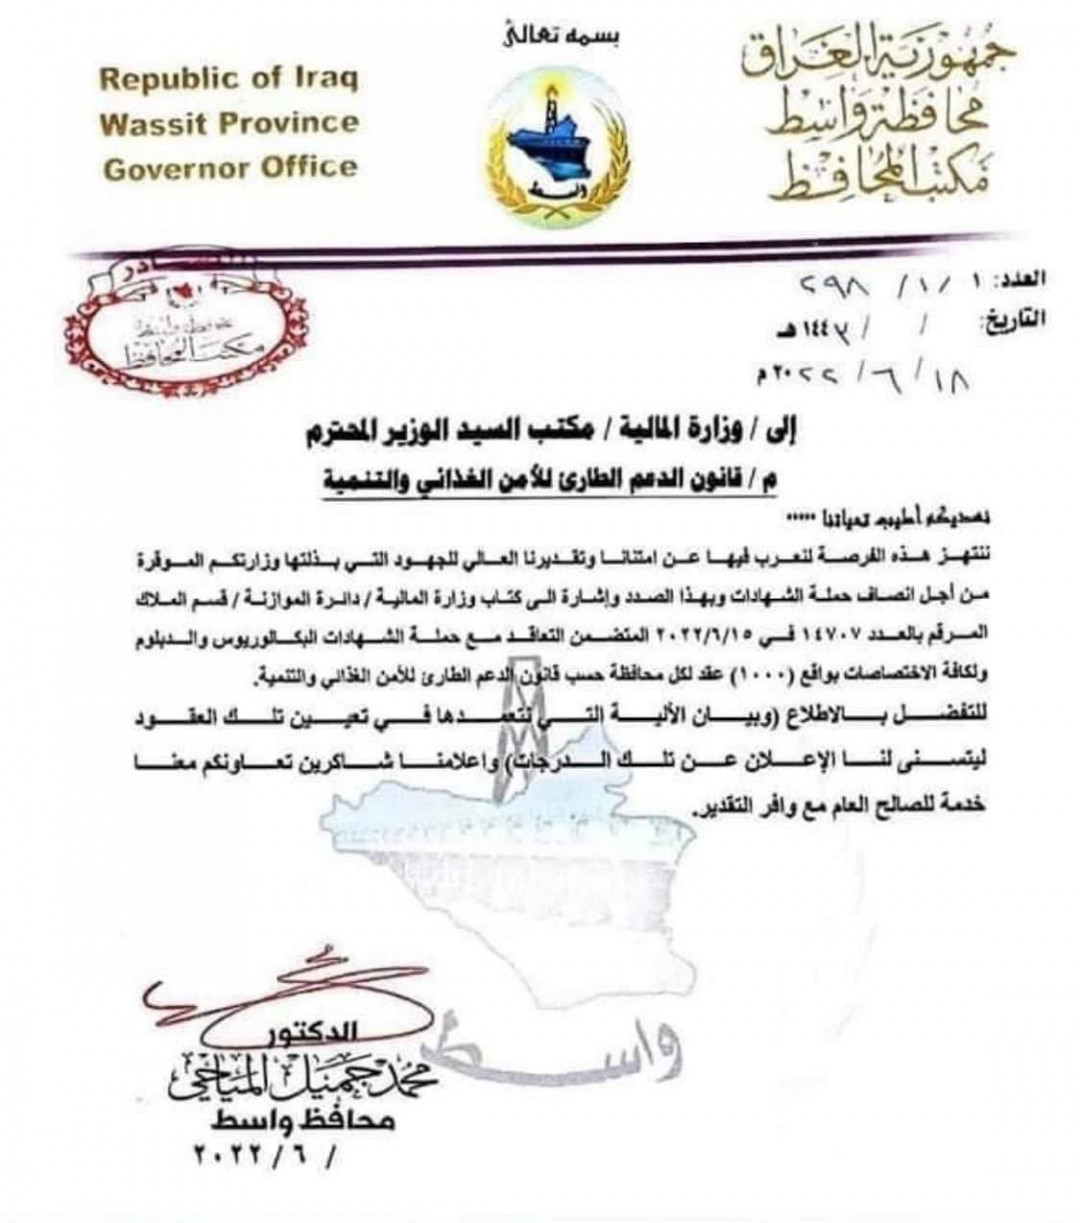 According to the Food Security Law, Wasit calls on the Finance Ministry to indicate its share of the appointment of contracts